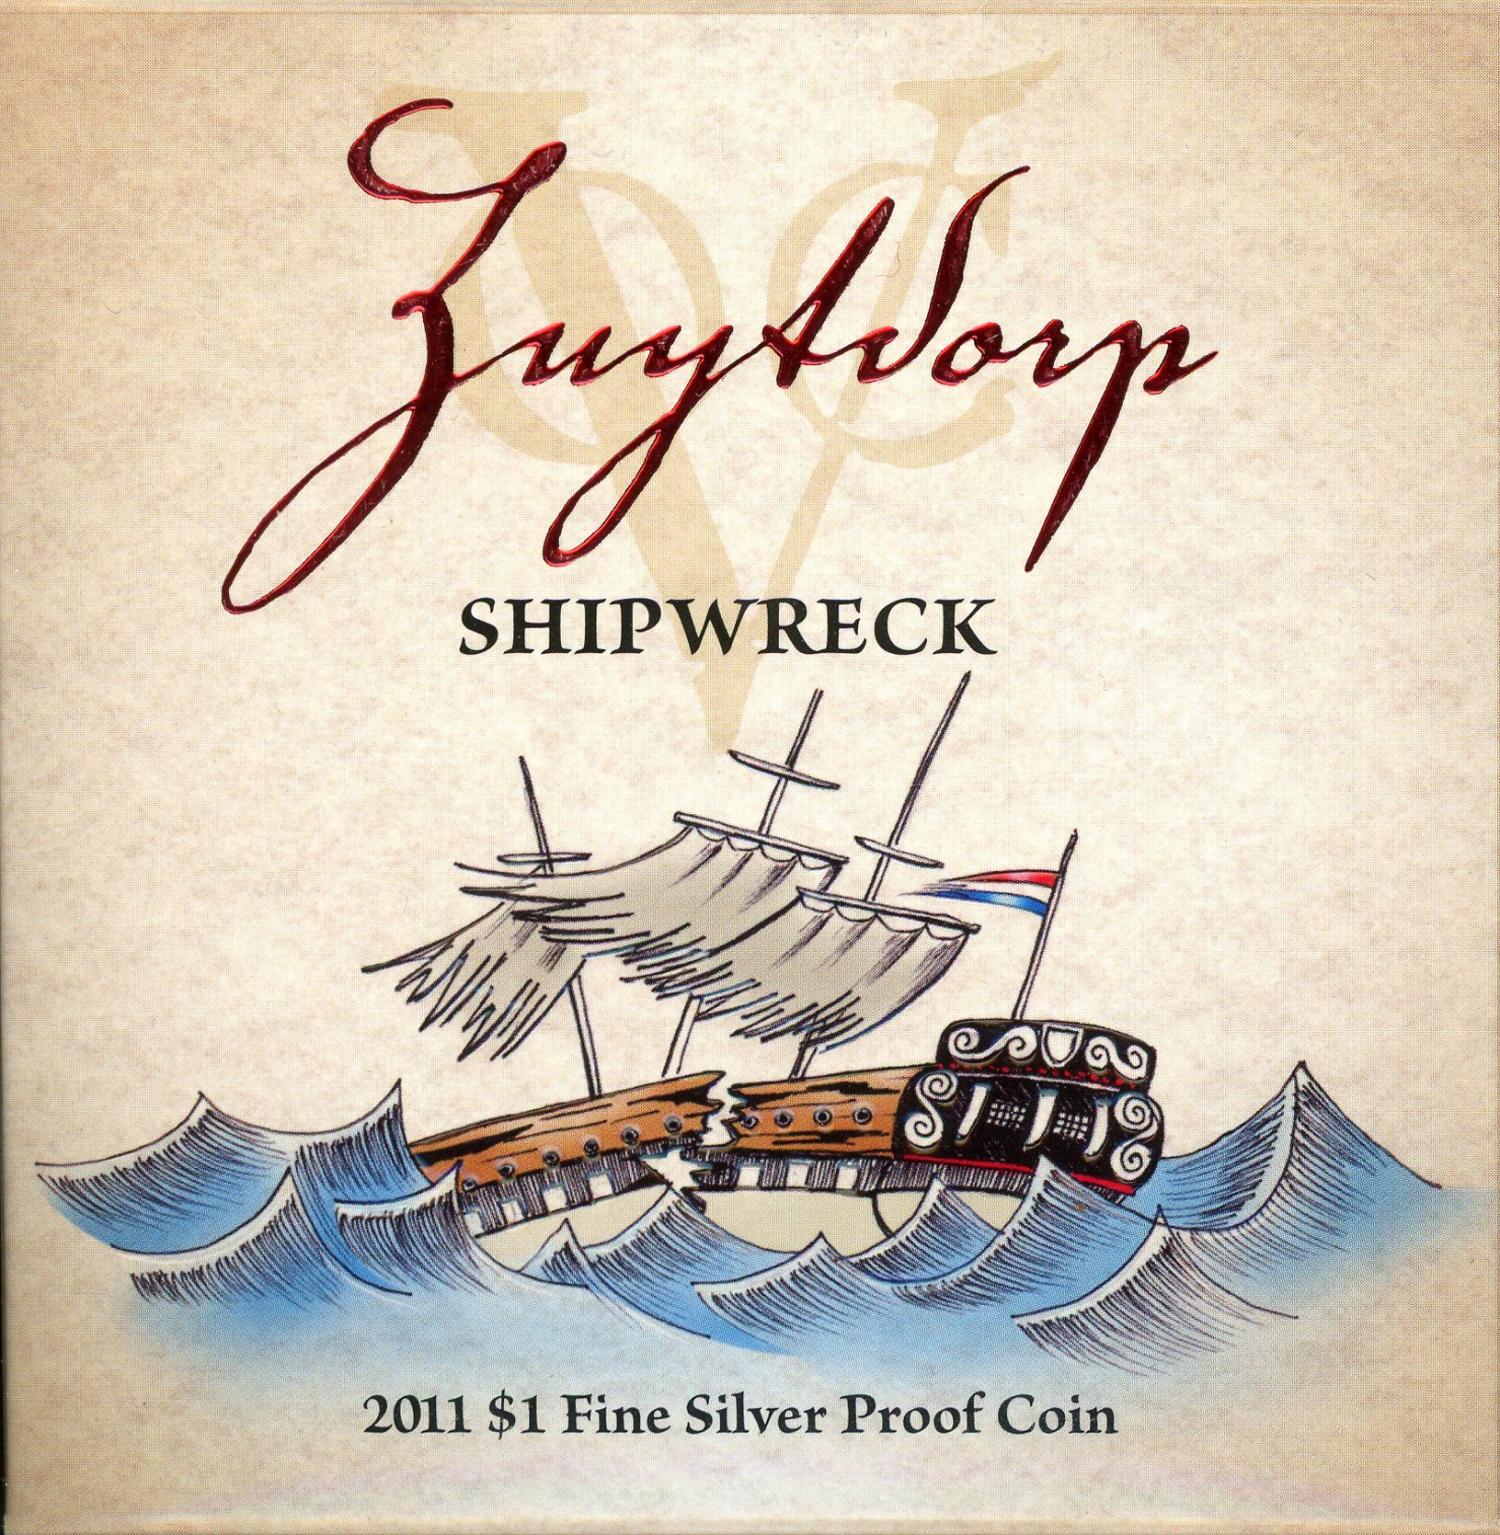 Thumbnail for 2011 Zuytdorp Shipwreck Made To Order $1 Silver Proof